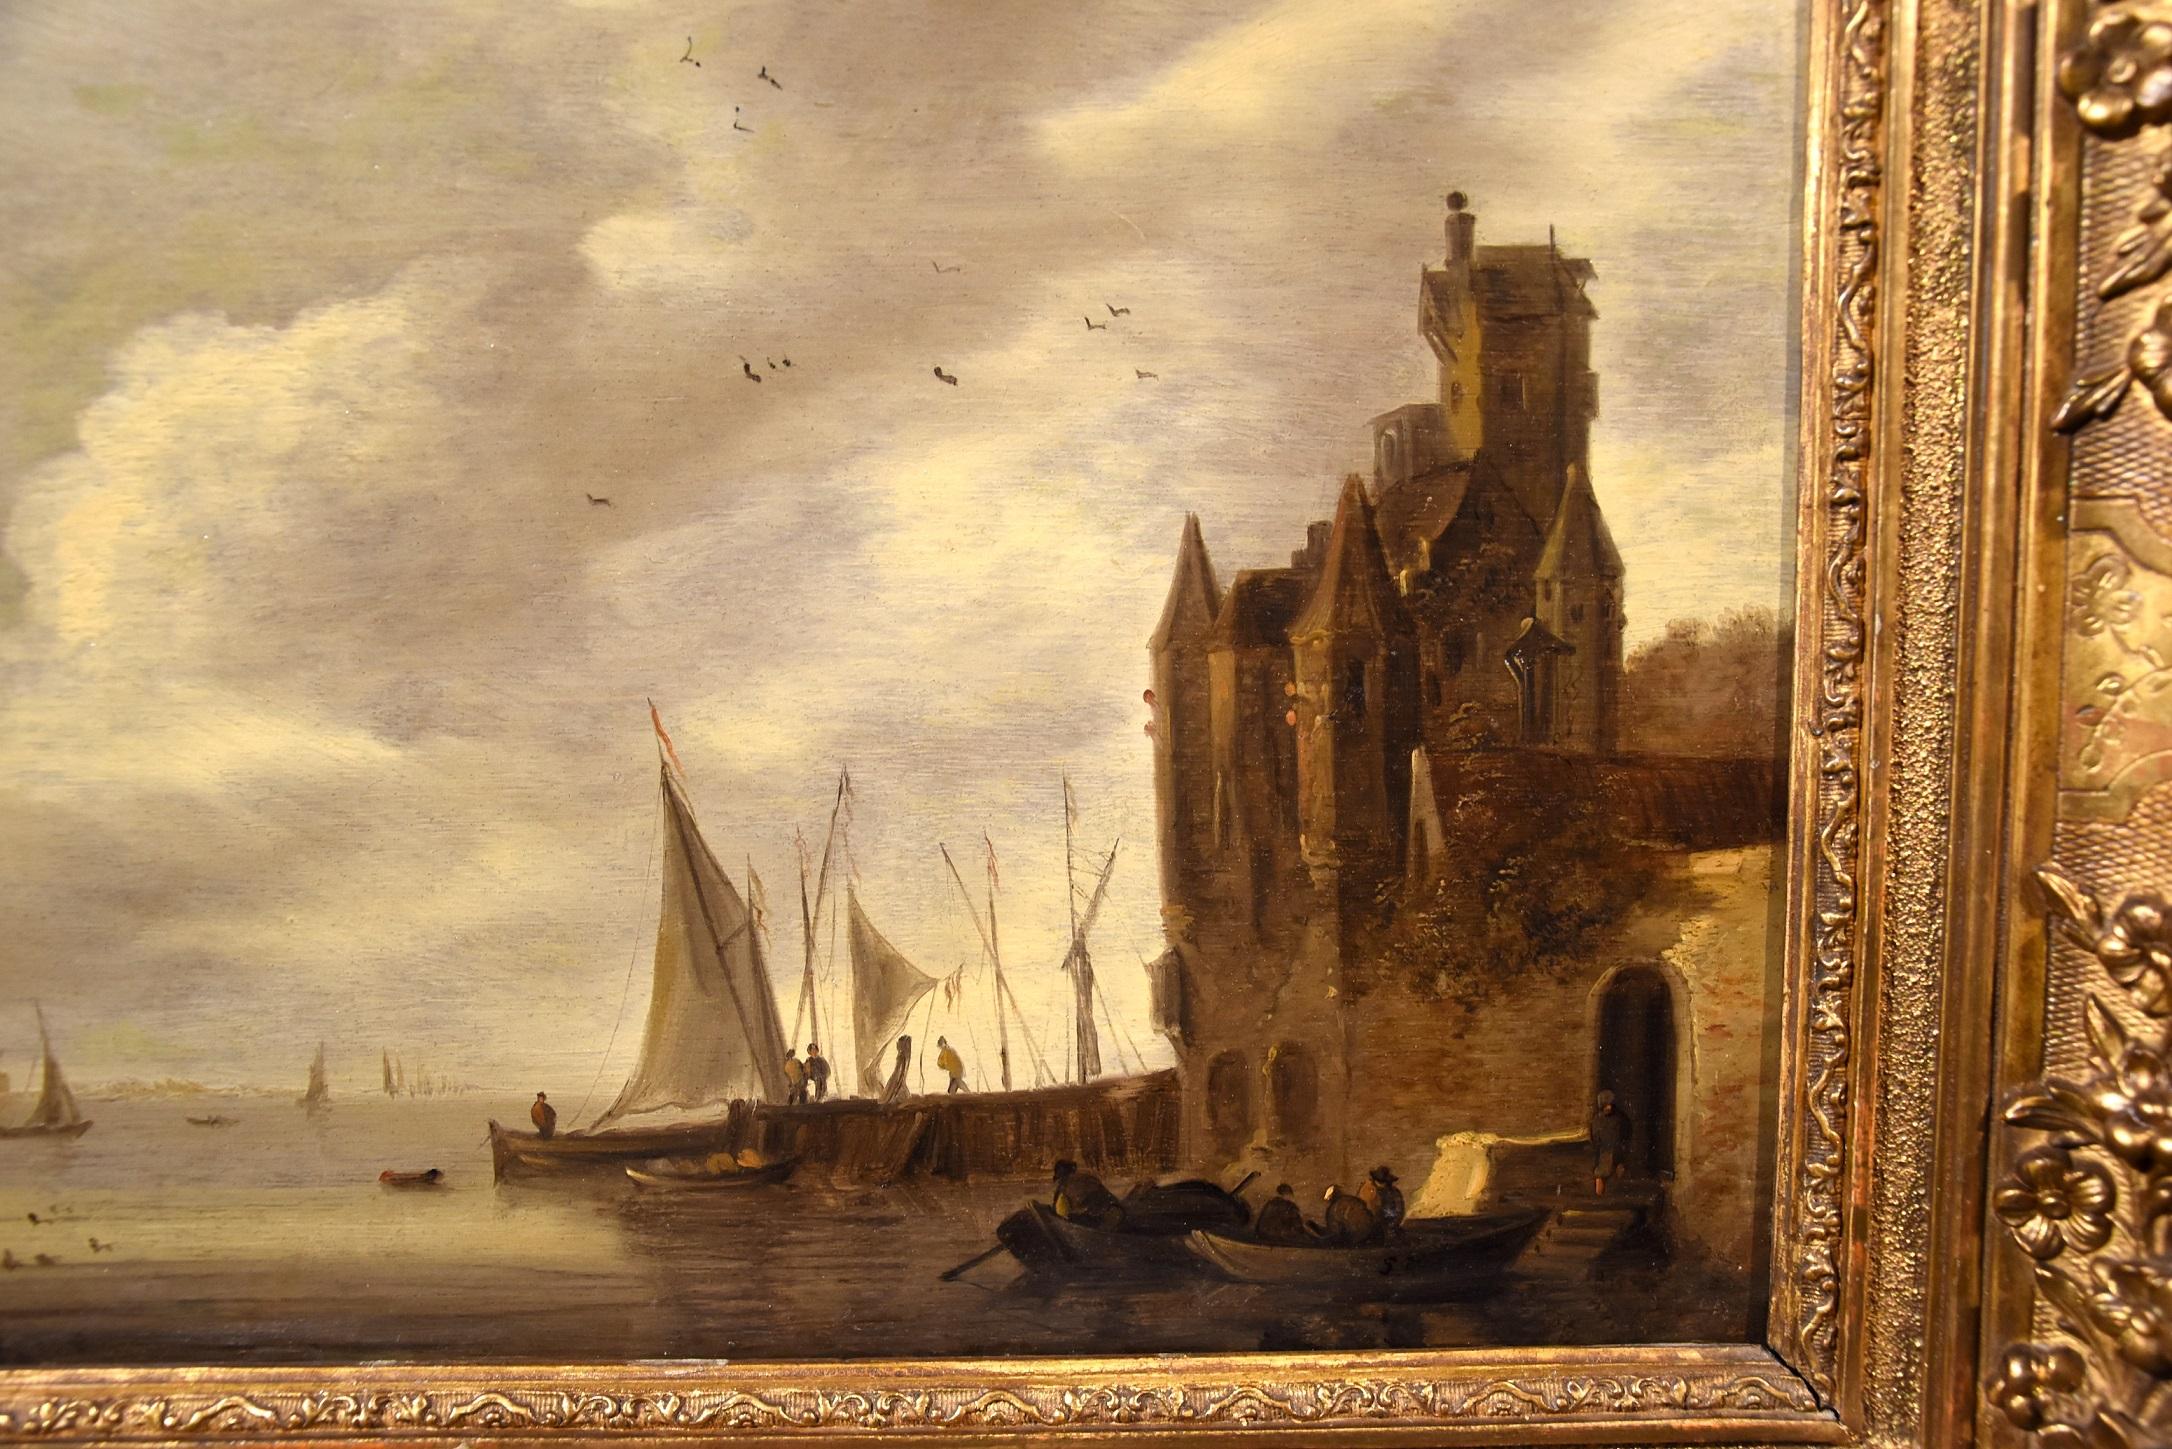 De Hulst Paint Oil on canvas Old master 17th Century River Landscape Port See  8